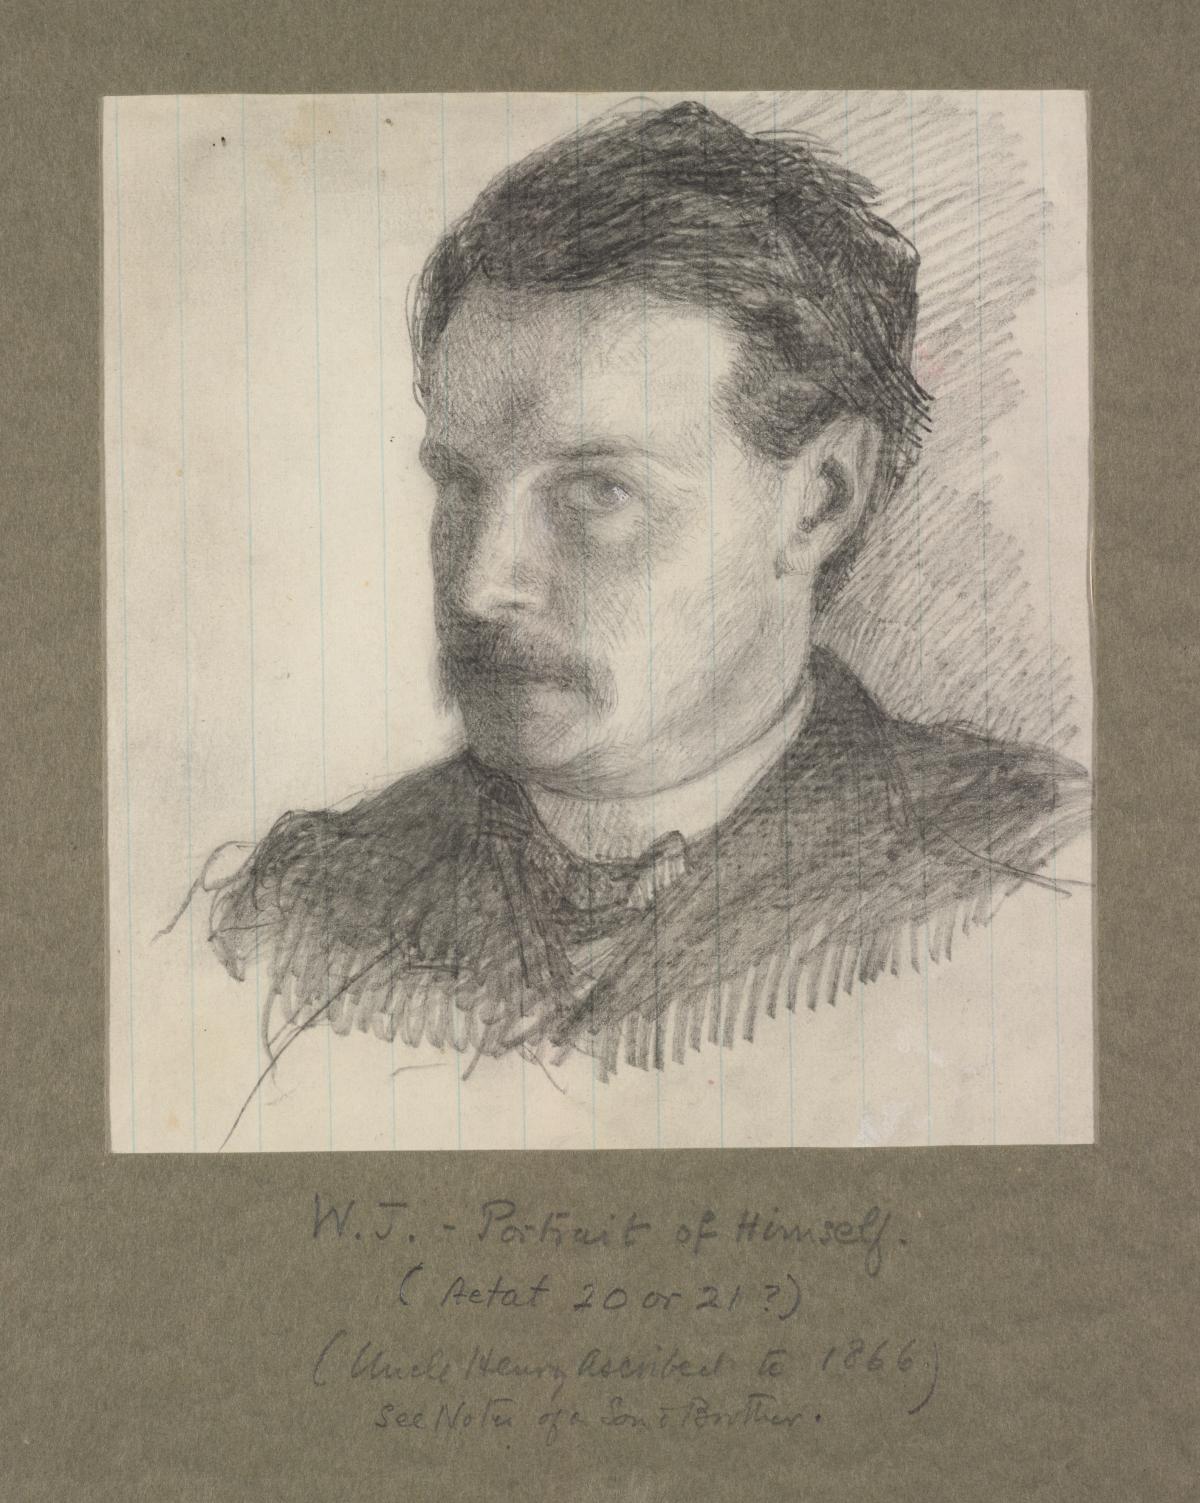 William James as a young man, drawn self-portrait